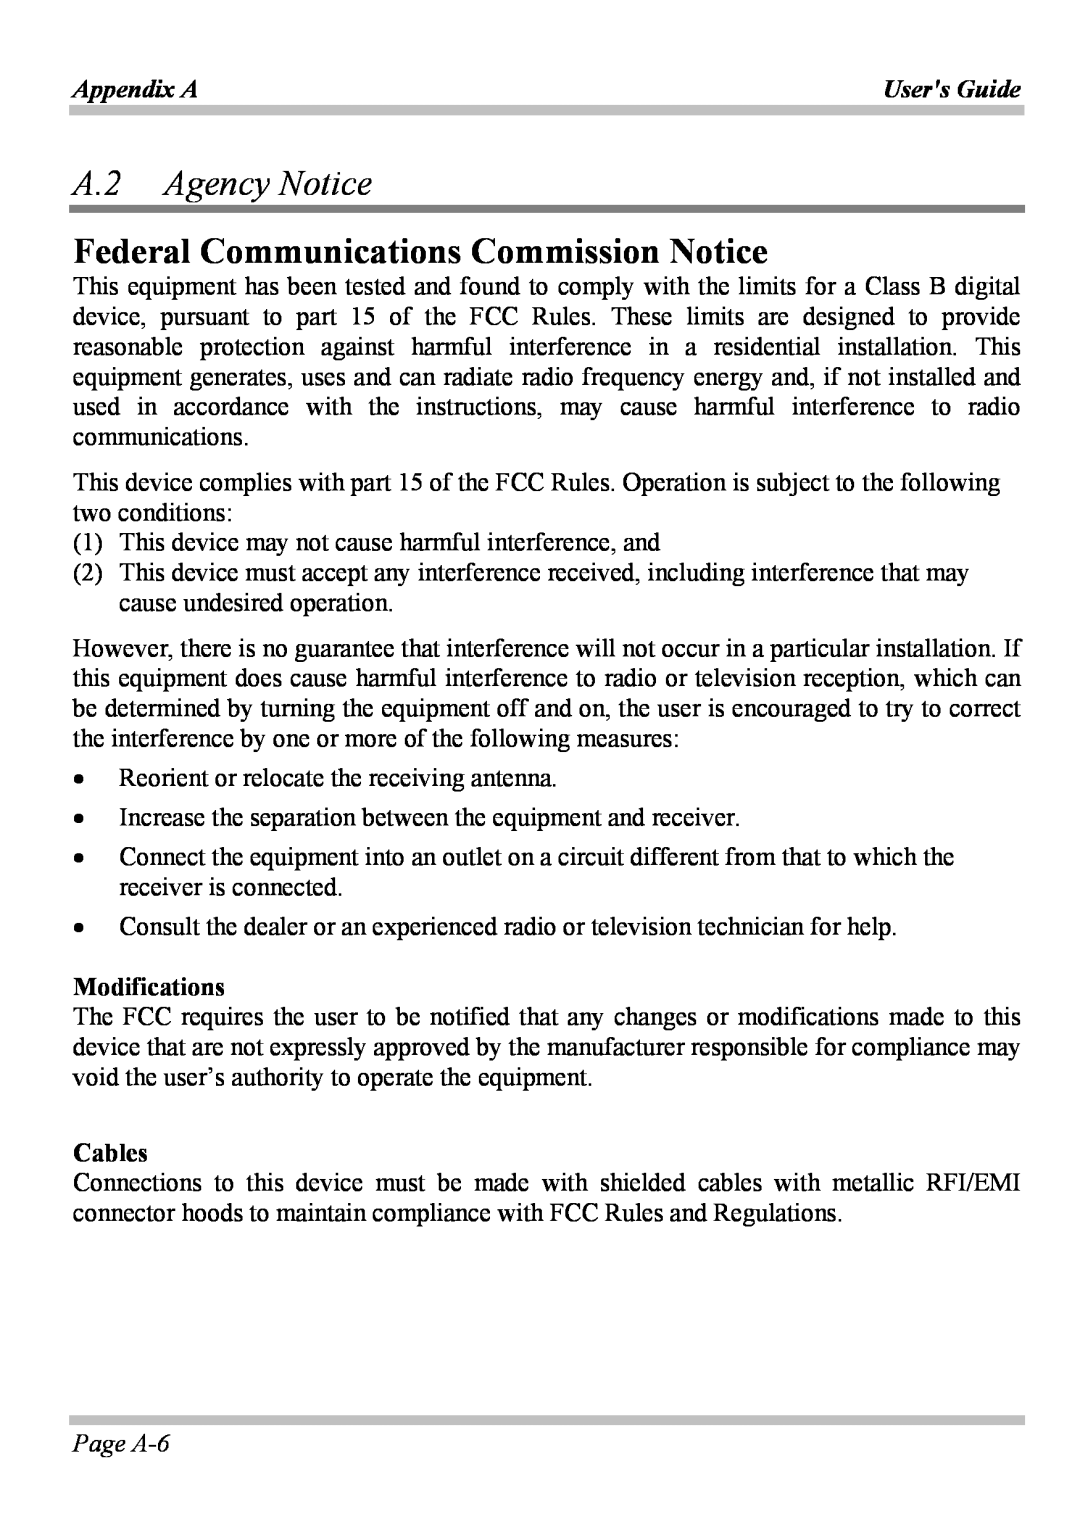 Microsoft W840DI A.2 Agency Notice, Federal Communications Commission Notice, Modifications, Cables, Page A-6, Appendix A 